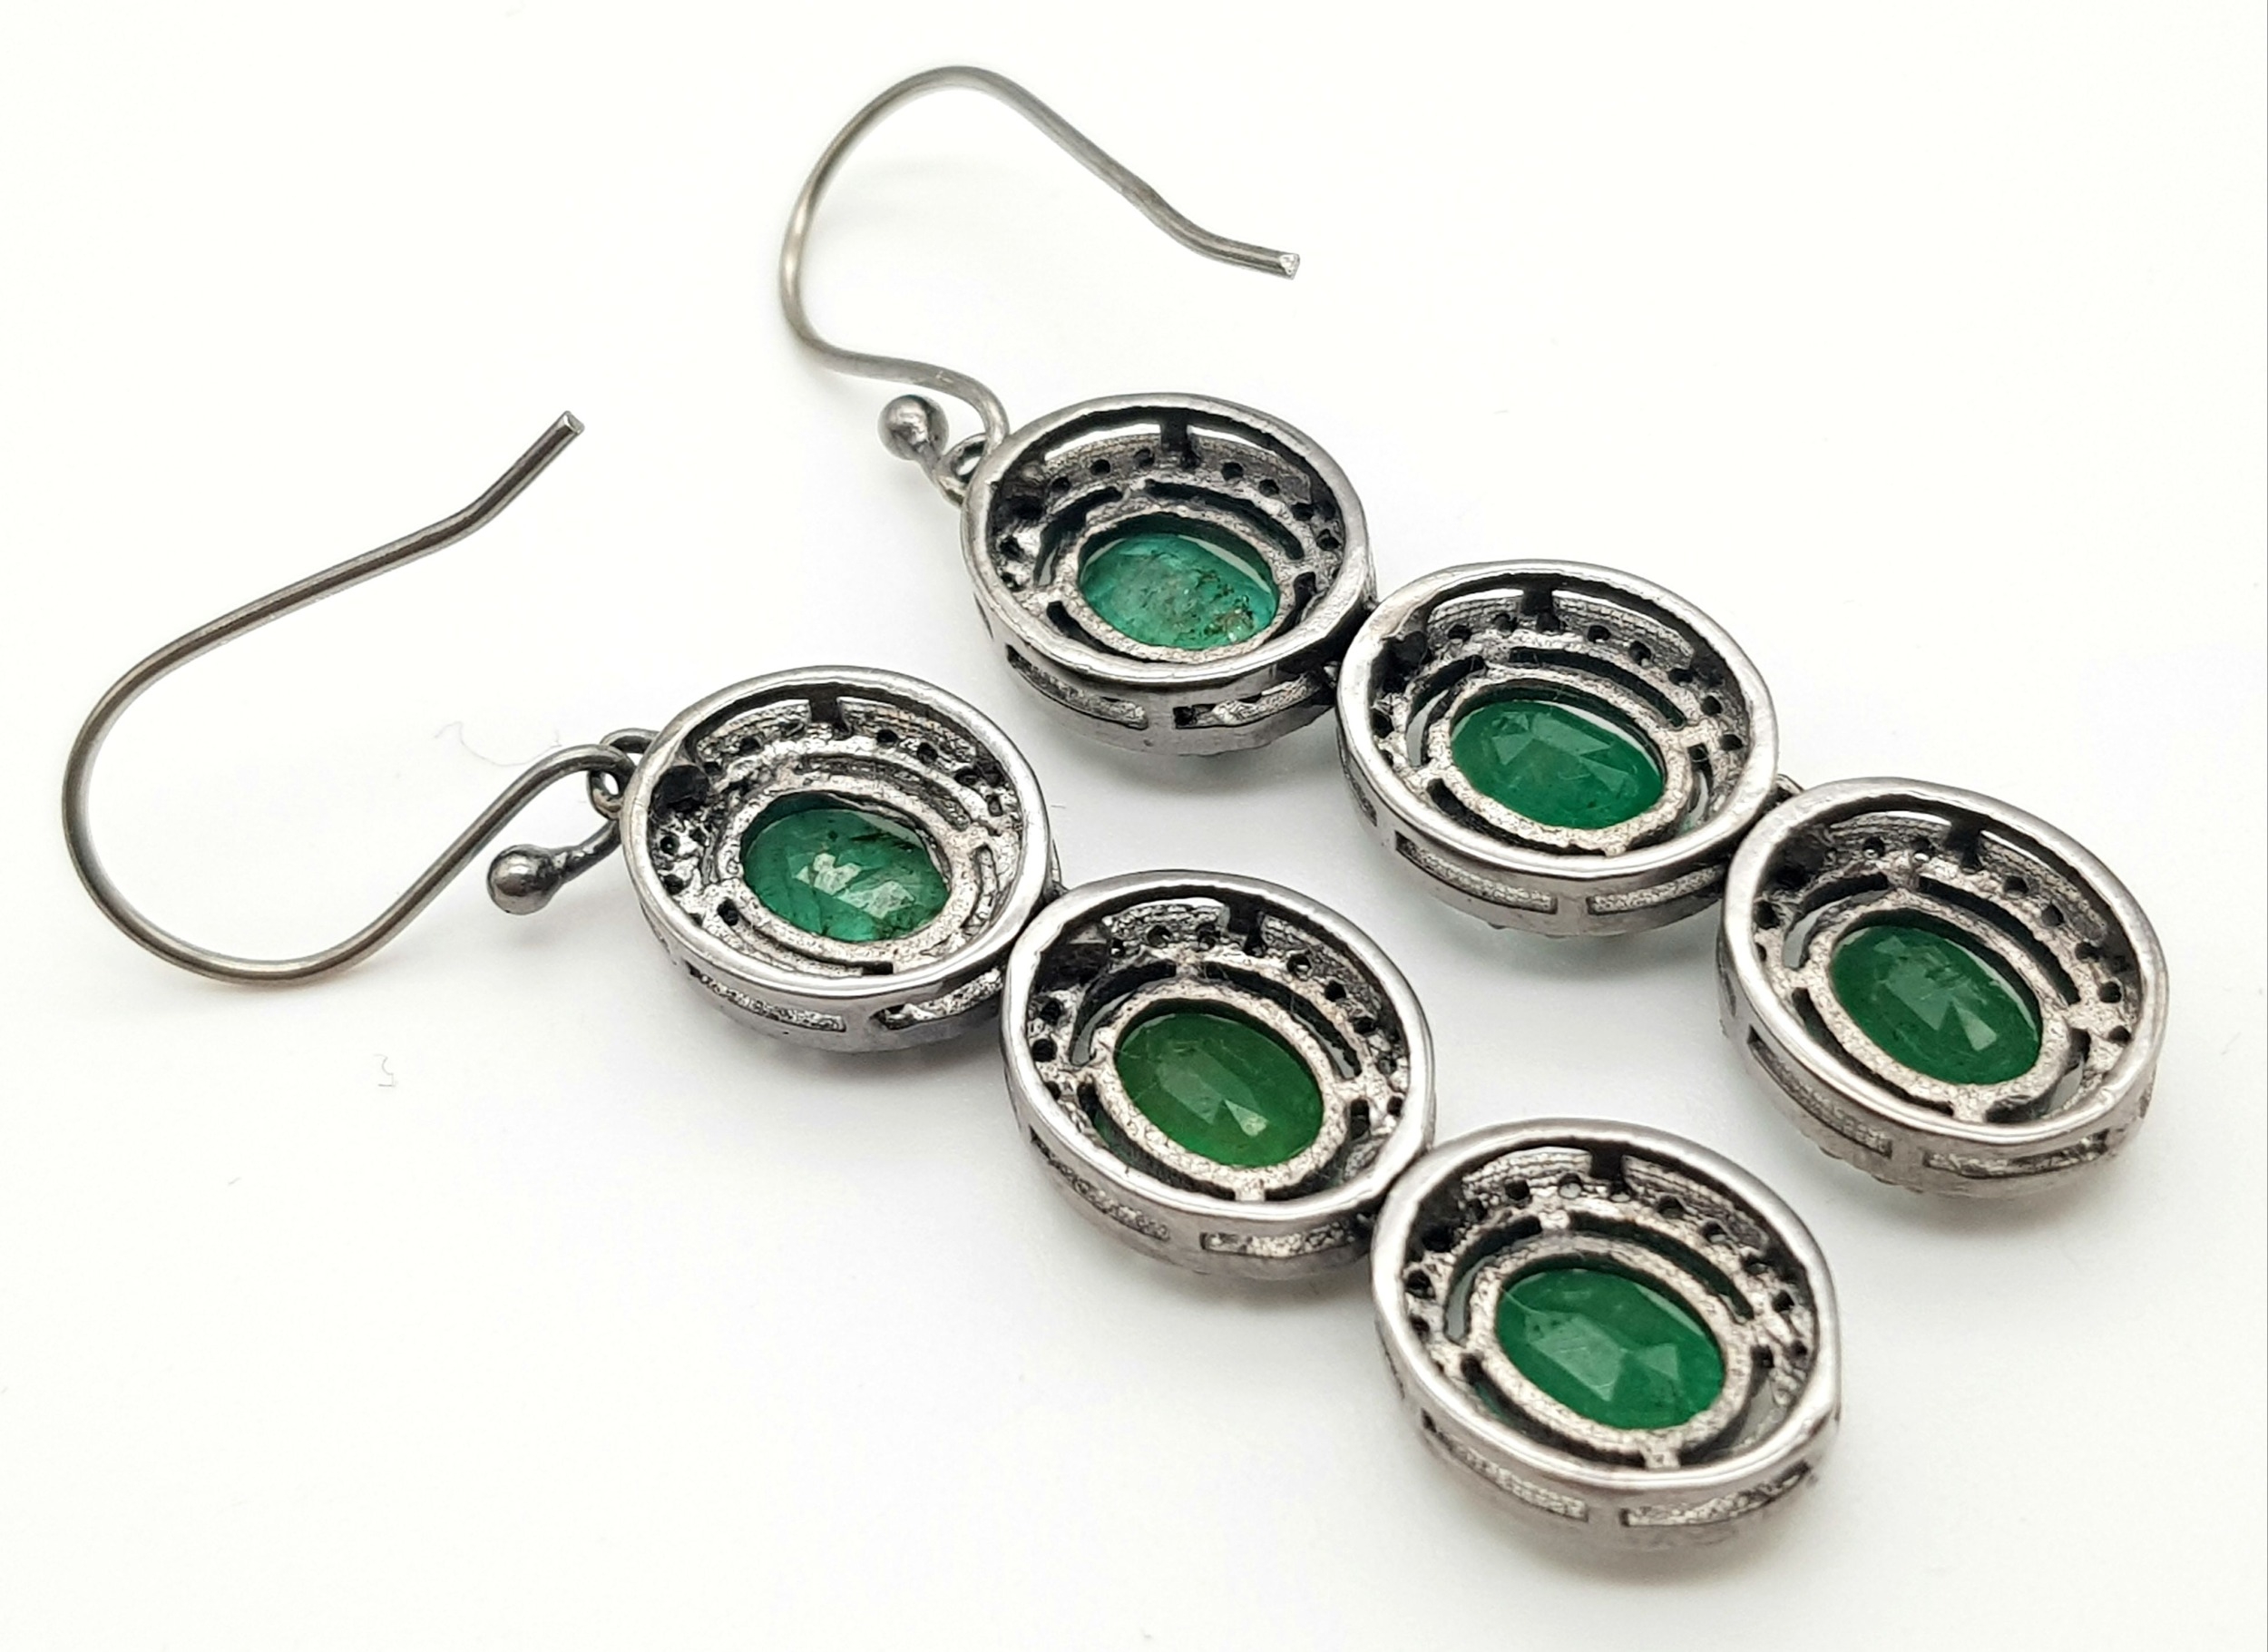 A Pair of Emerald Gemstone Drop Earrings with Halos of Diamonds. Set in 925 Silver. Emeralds - - Image 3 of 4